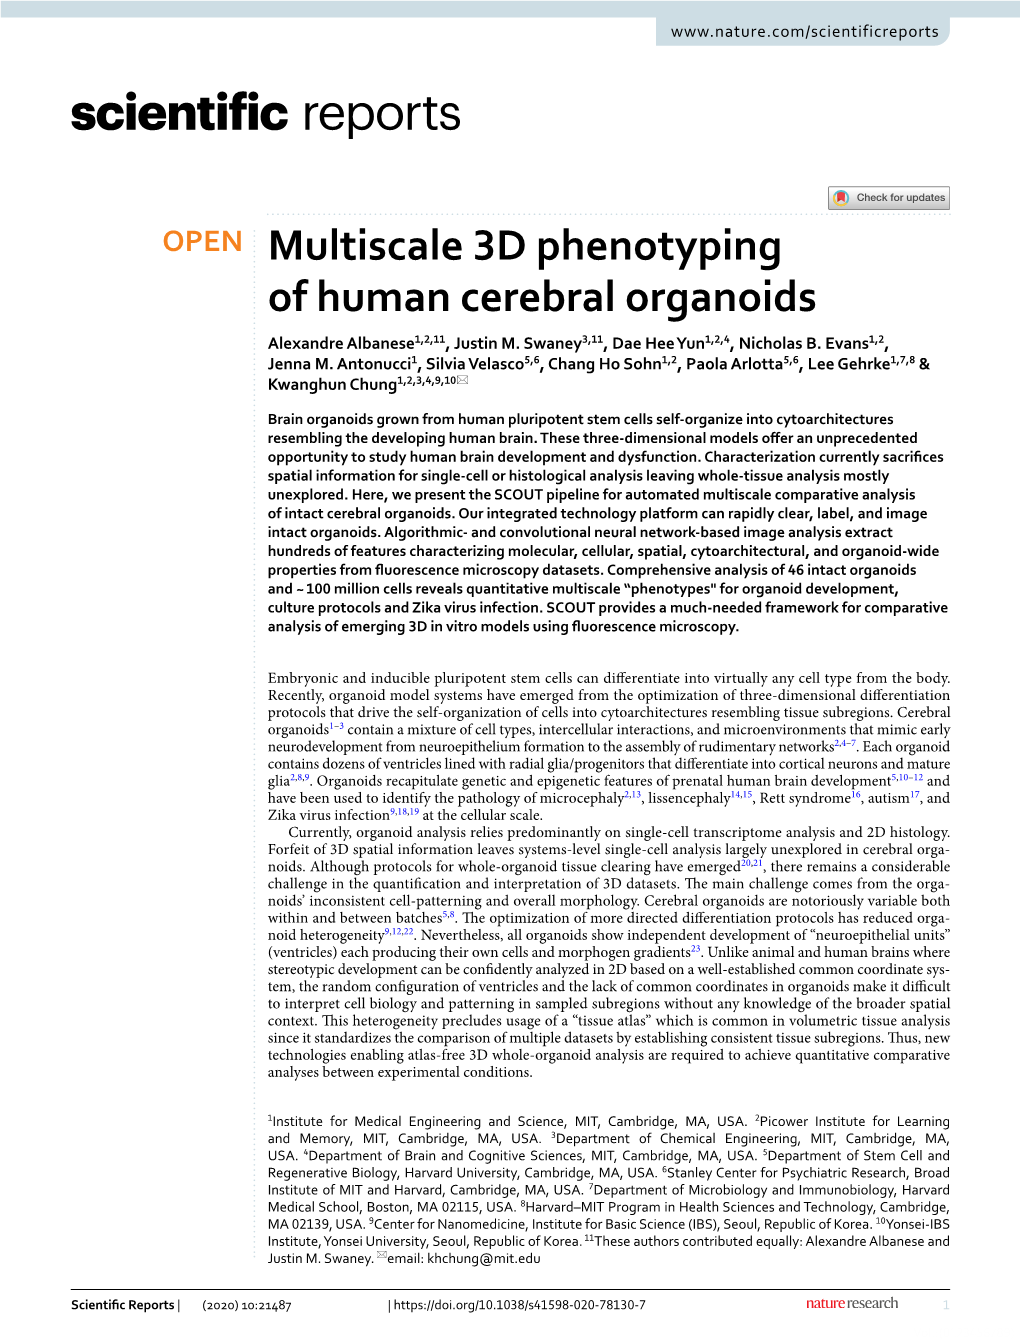 Multiscale 3D Phenotyping of Human Cerebral Organoids Alexandre Albanese1,2,11, Justin M